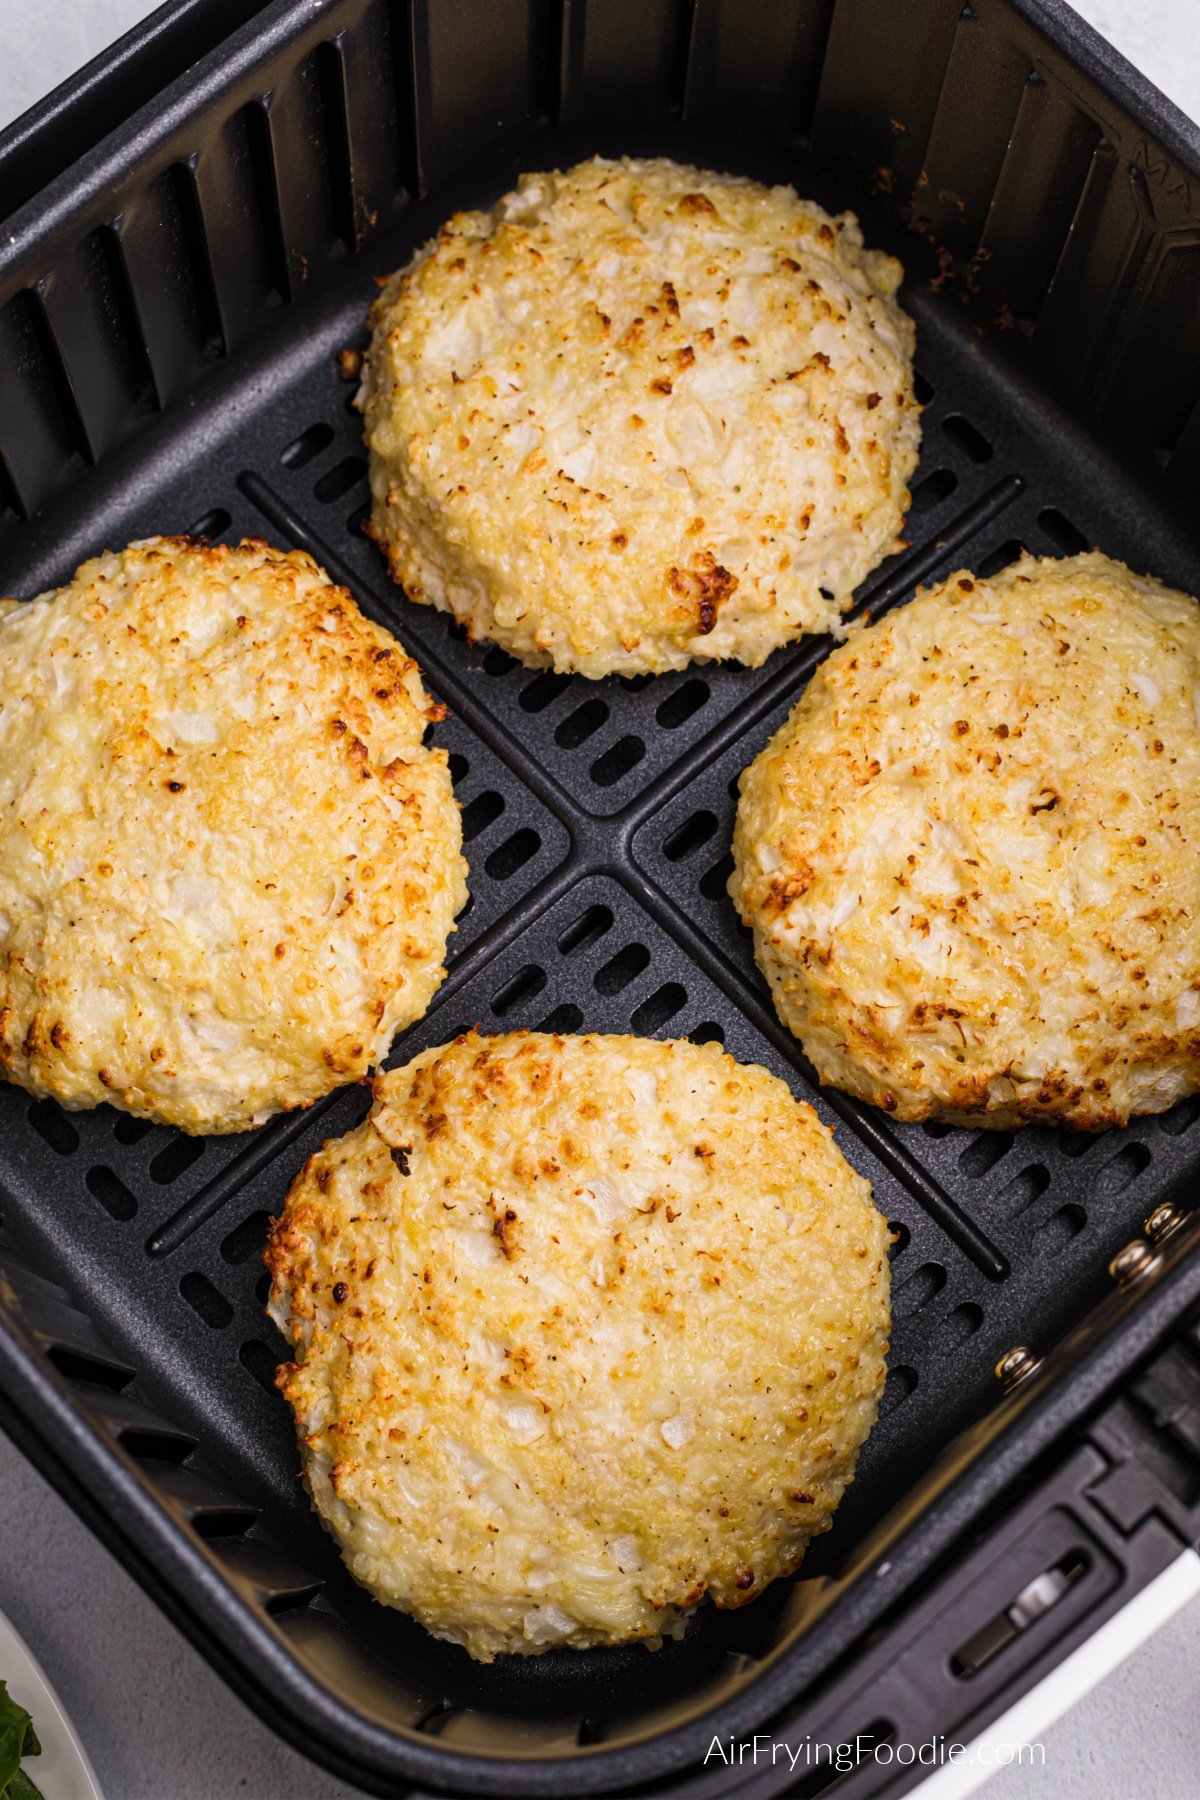 Chicken burgers that have been air fried in the basket of the air fryer.